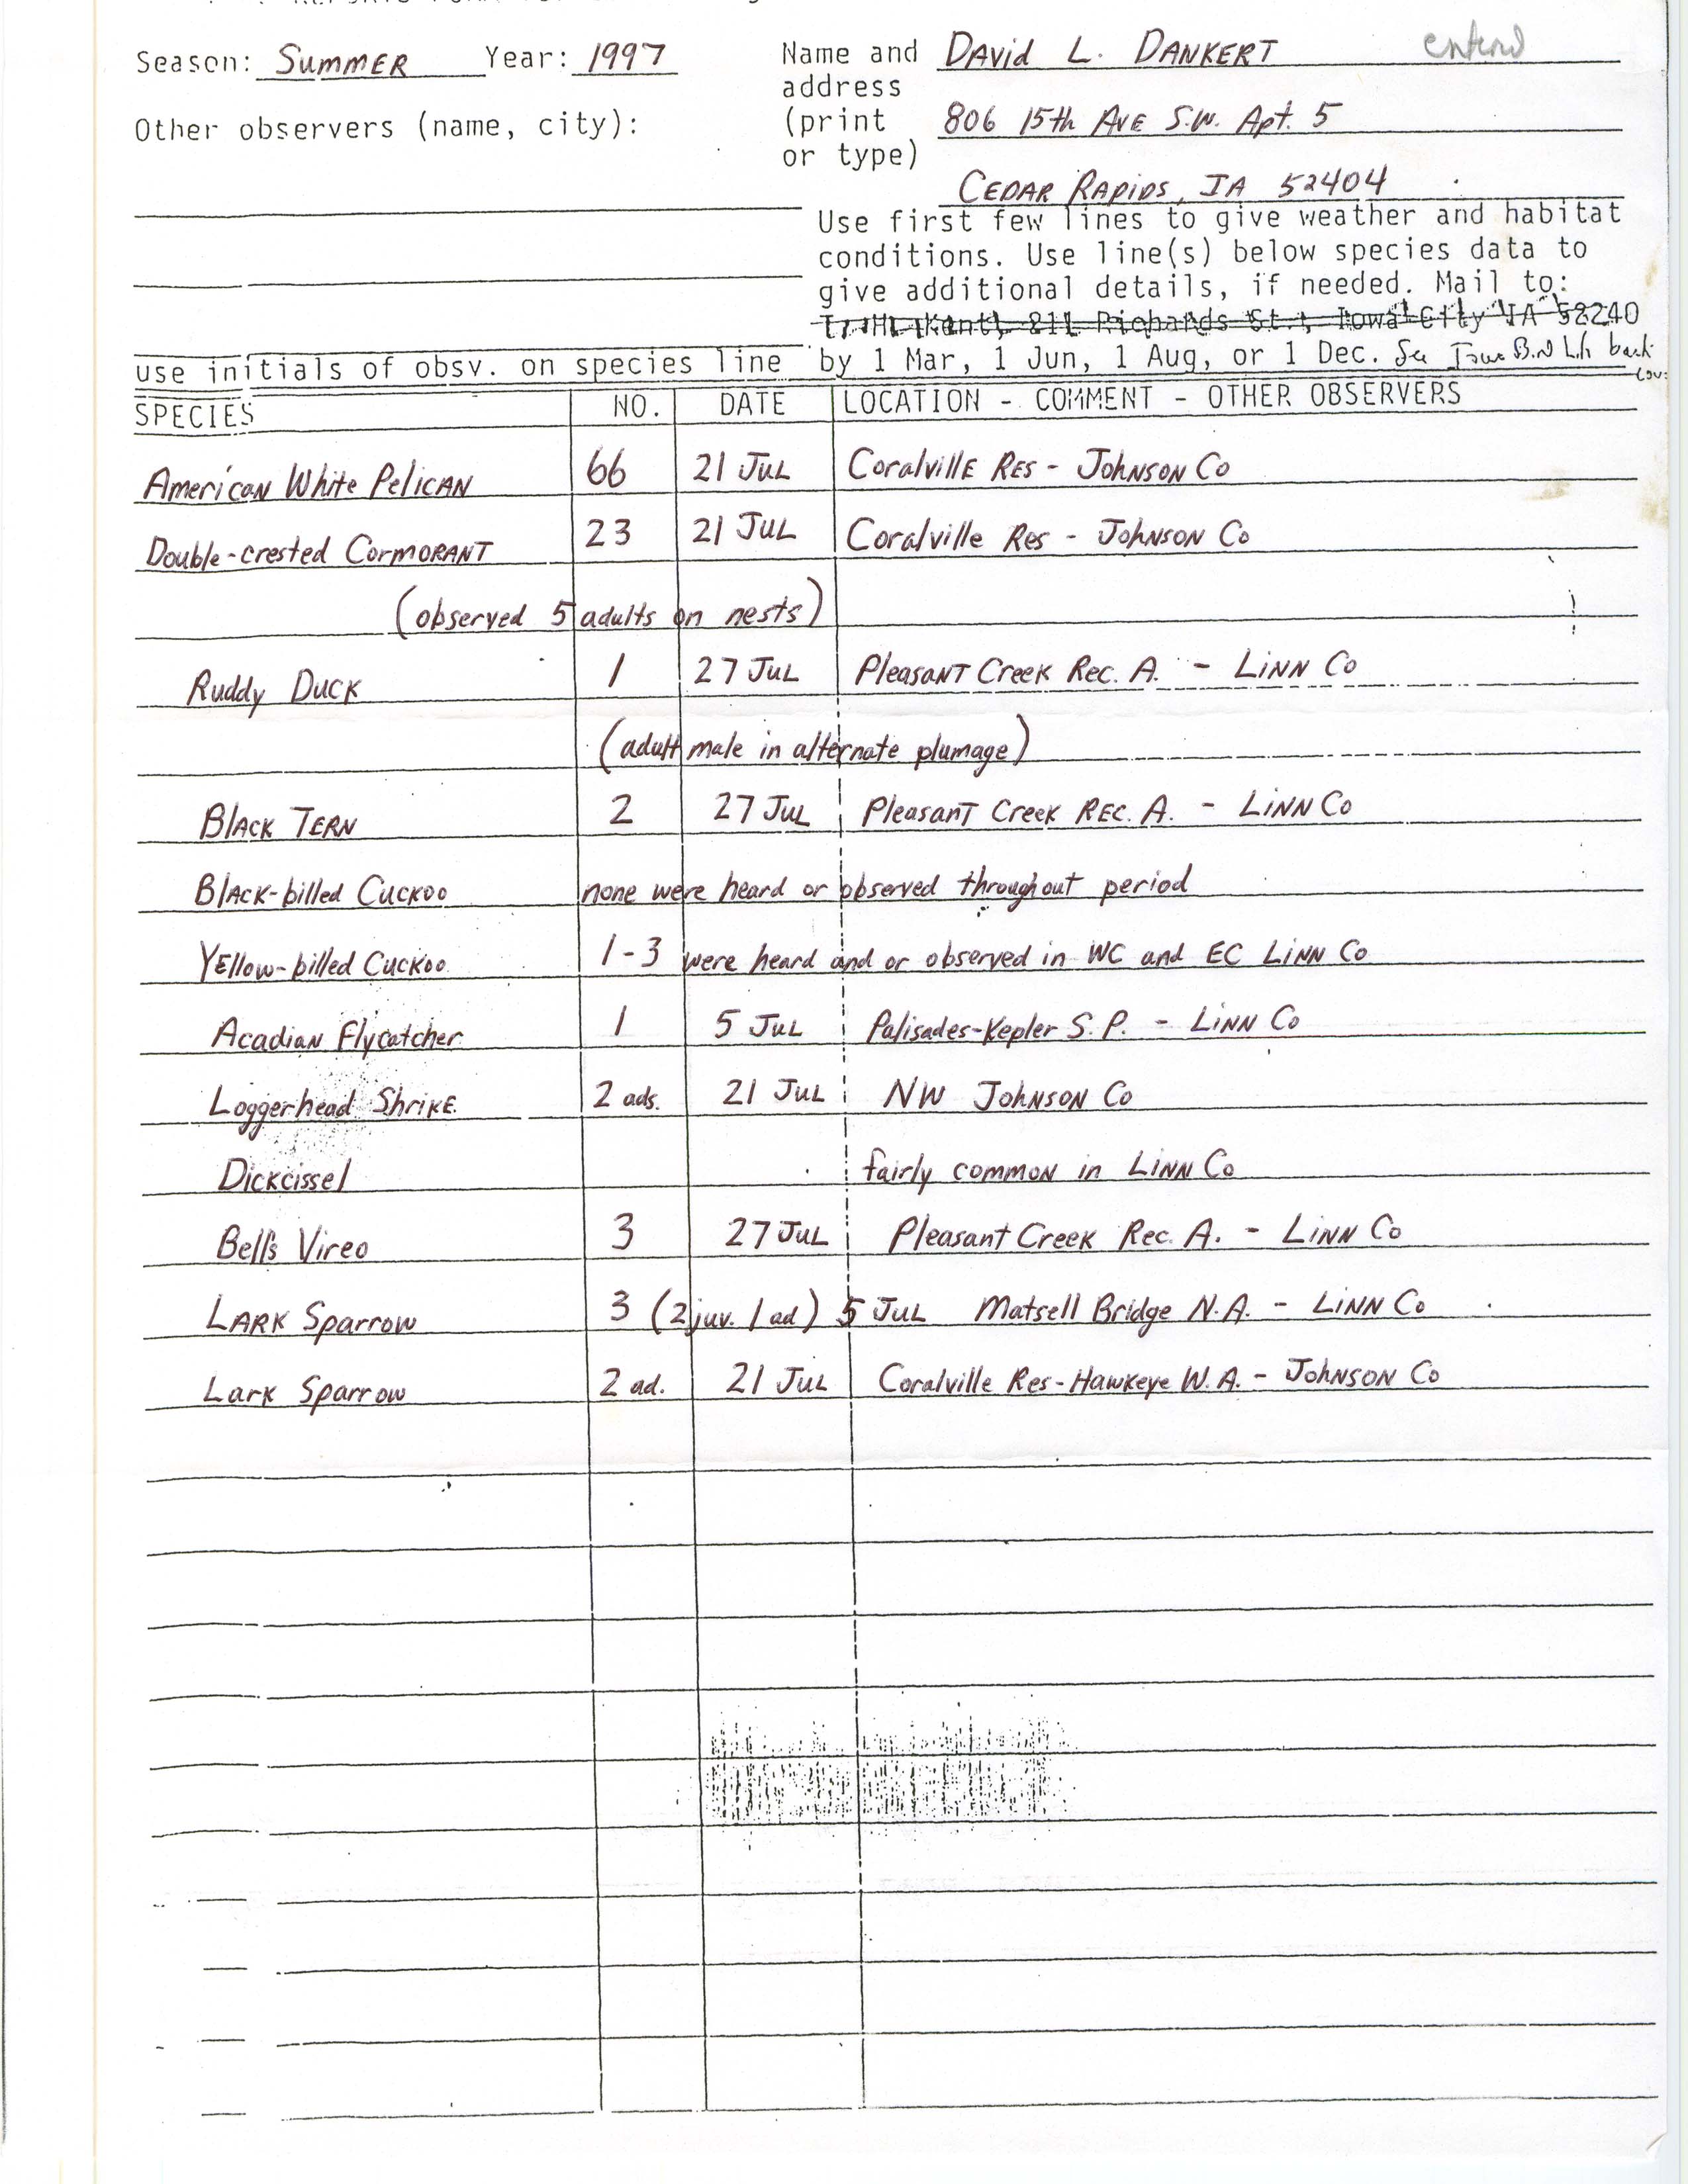 Field reports form for submitting seasonal observations of Iowa birds, David L. Dankert, summer 1997